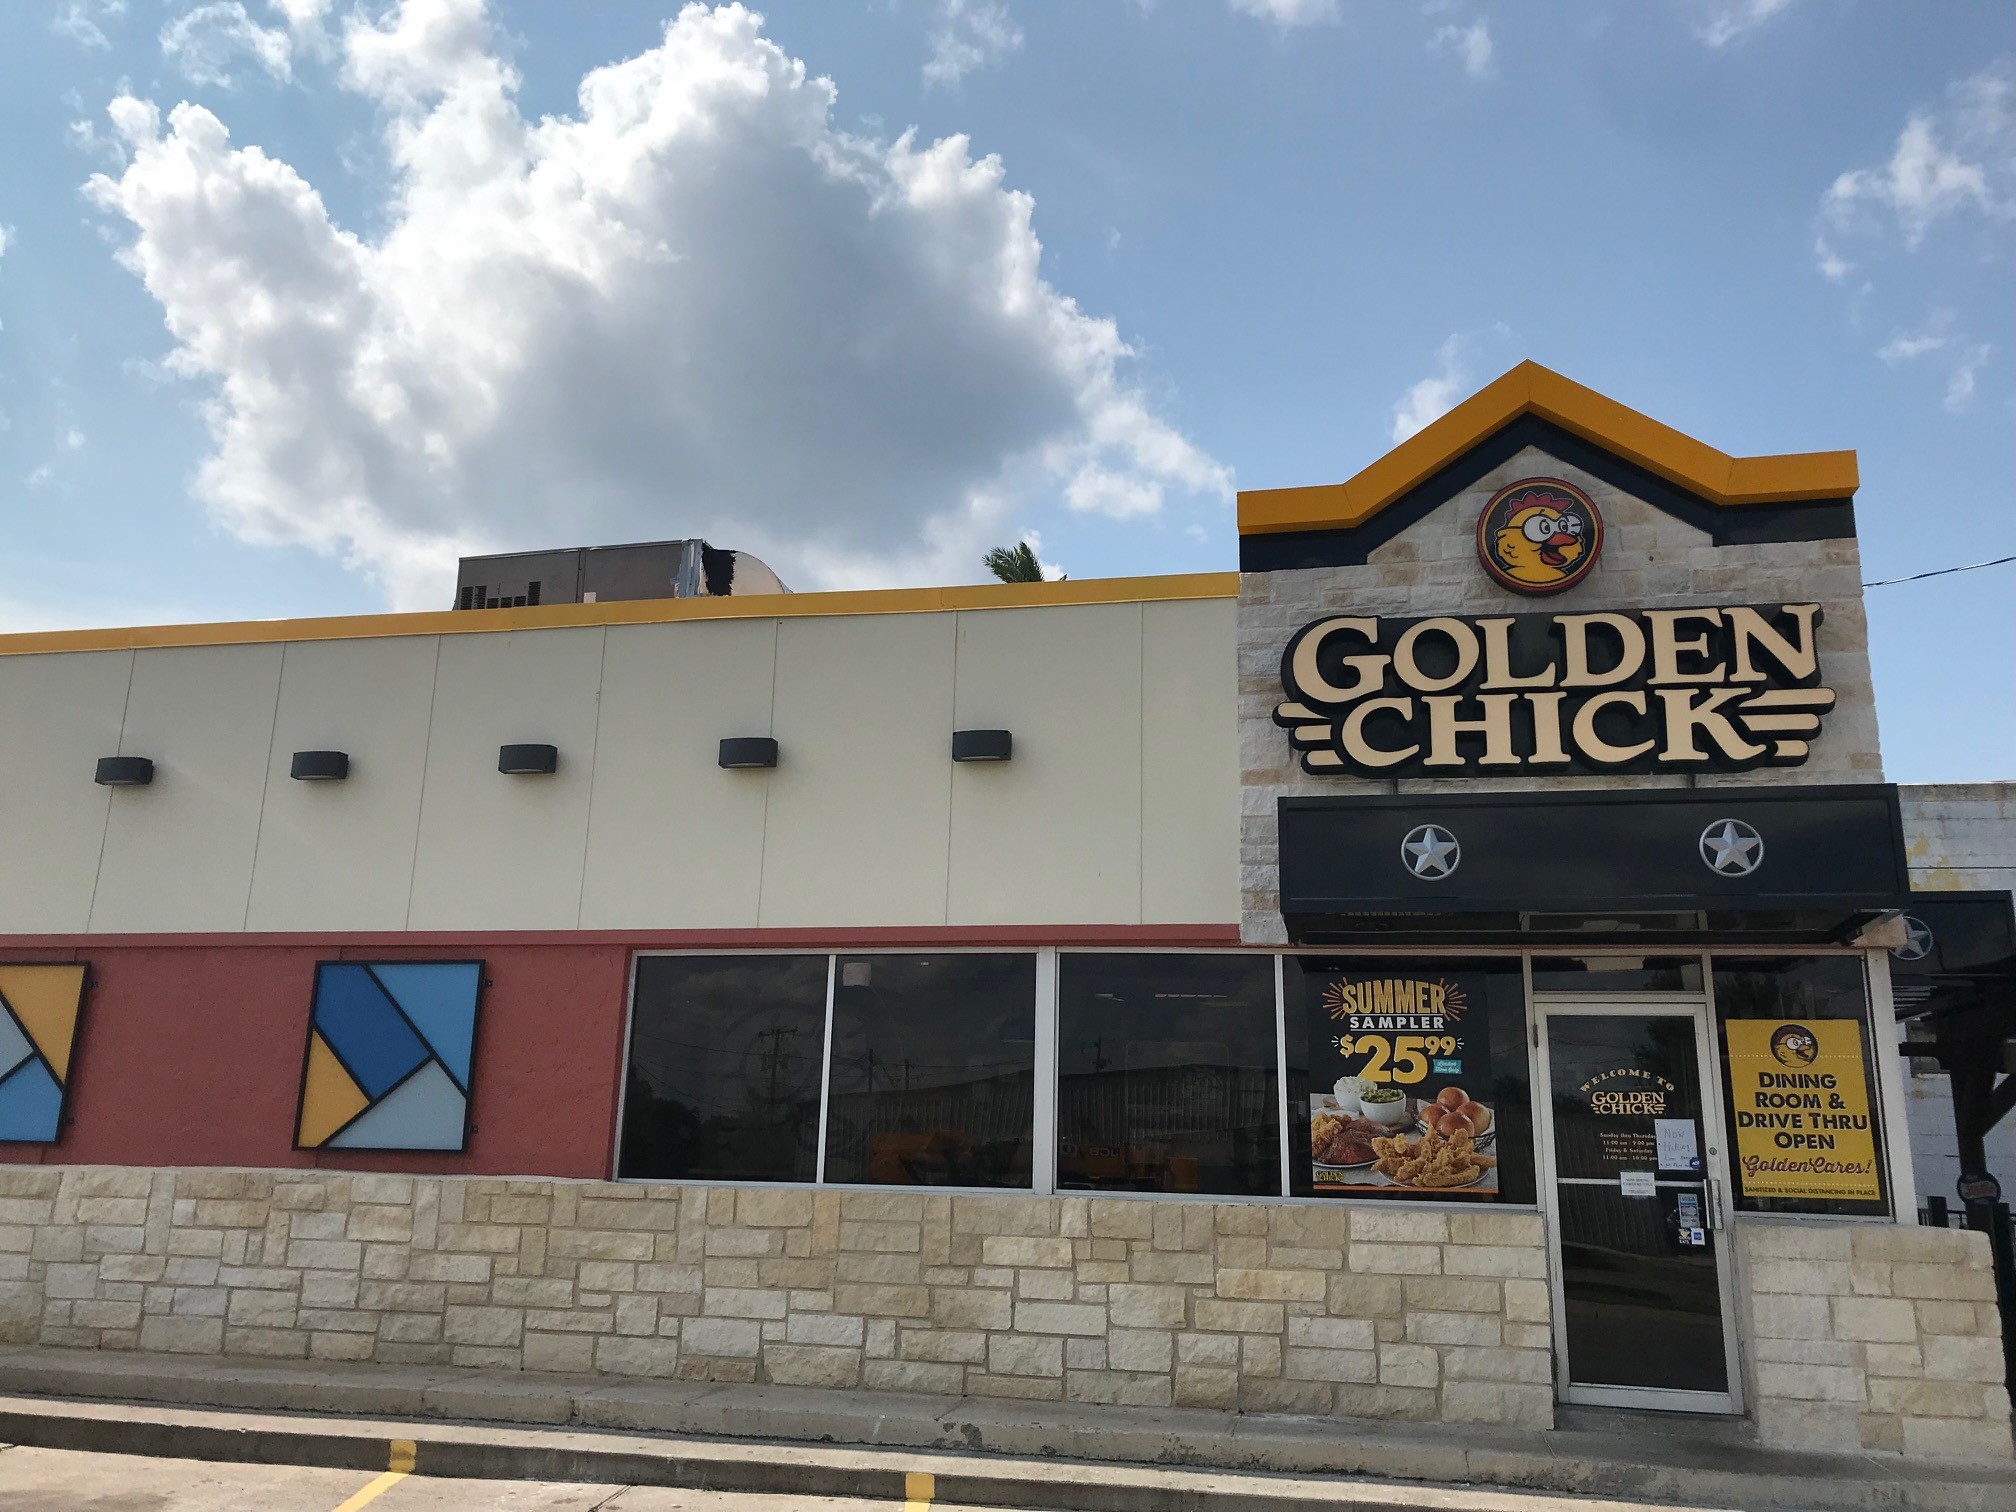 Golden Chick storefront.  Your local Golden Chick fast food restaurant in Crystal City, Texas